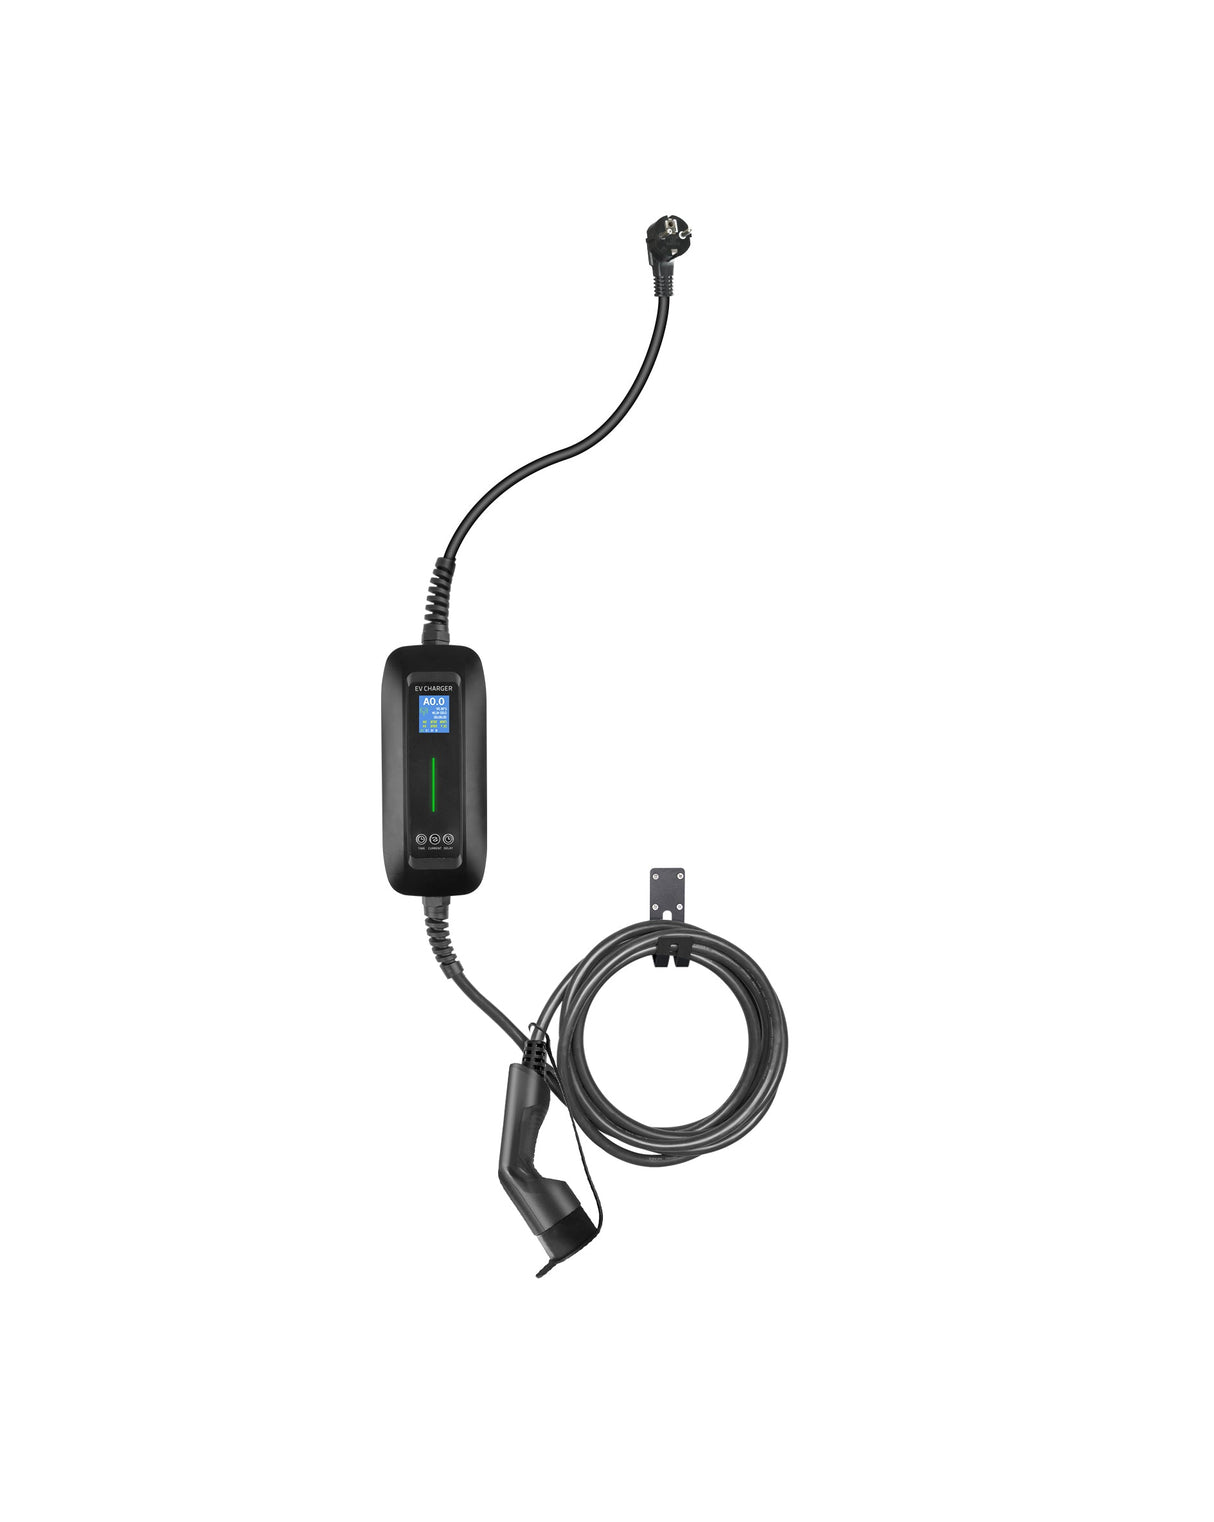 Mobile Charger Kia e-Niro - LCD Black Type 2 to Schuko - Delayed charging and Memory function